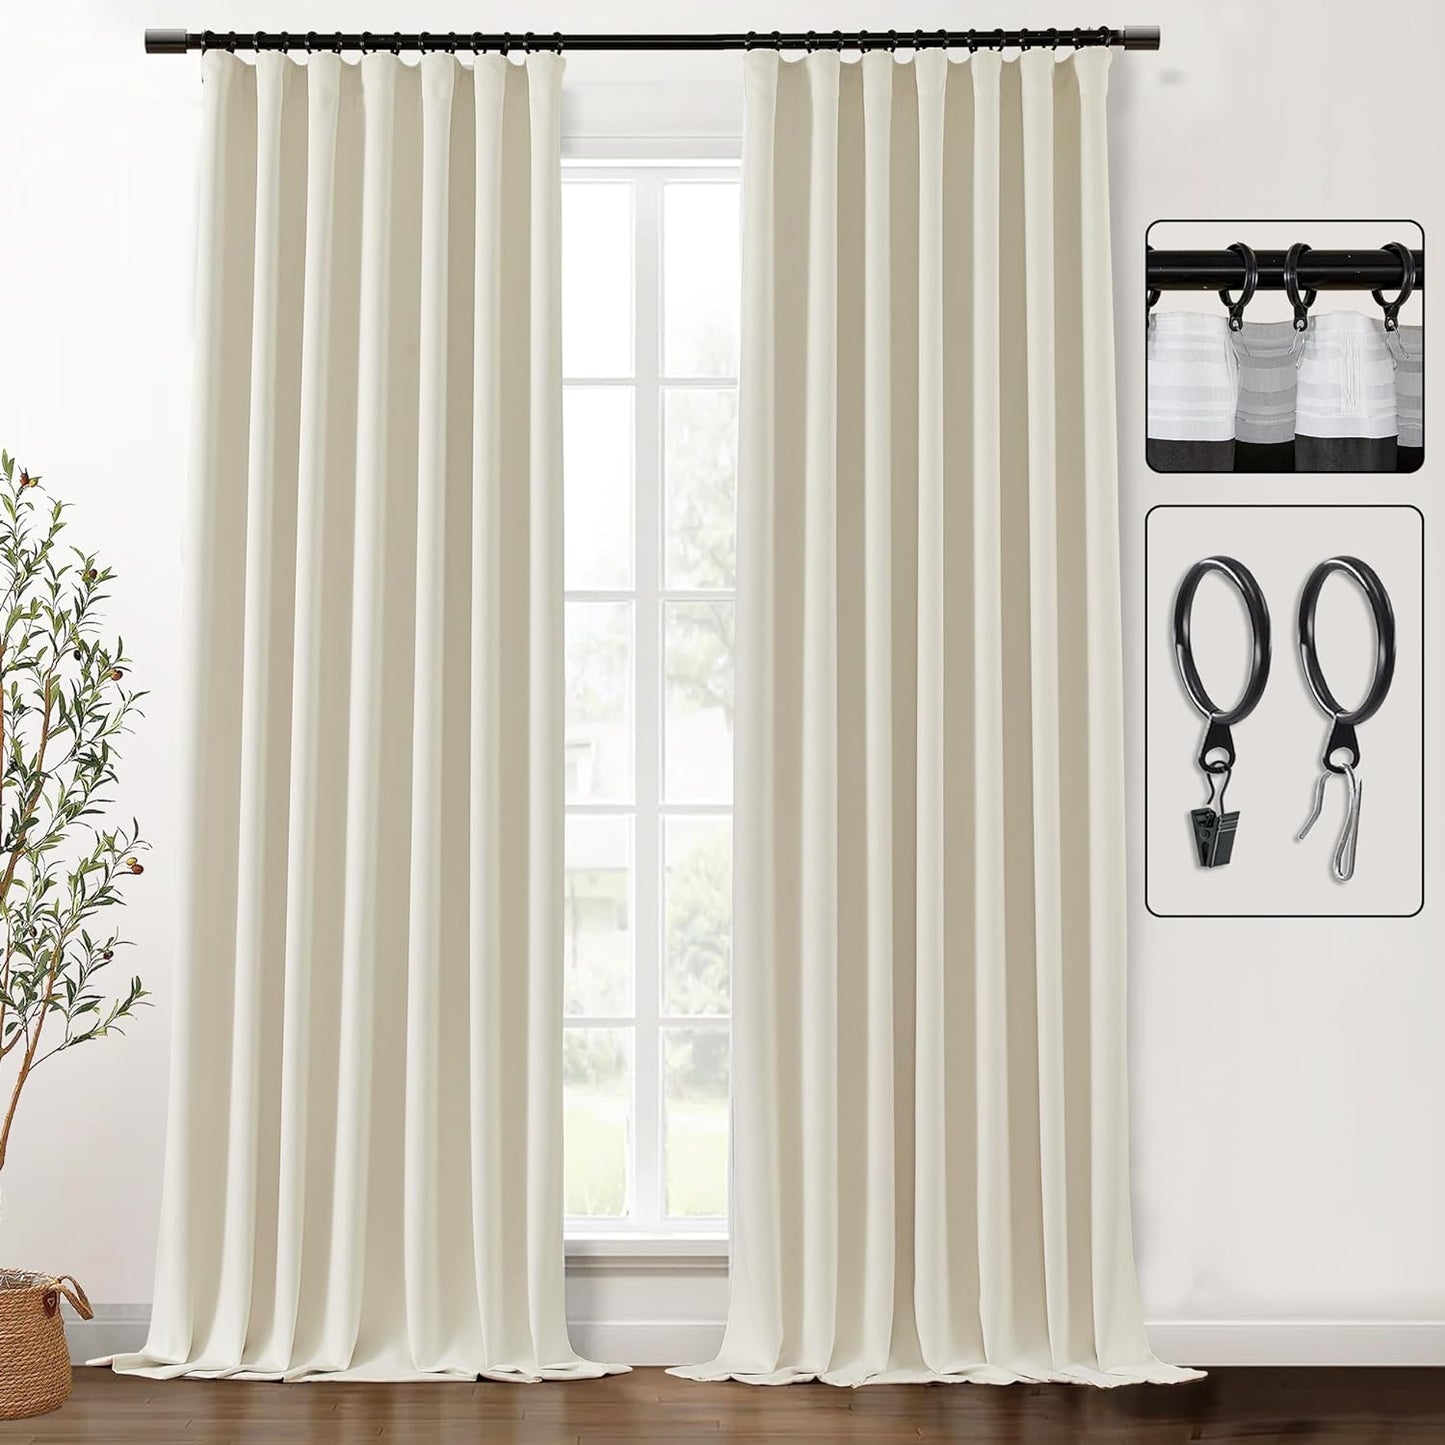 SHINELAND Beige Room Darkening Curtains 105 Inches Long for Living Room Bedroom,Cortinas Para Cuarto Bloqueador De Luz,Thermal Insulated Back Tab Pleat Blackout Curtains for Sunroom Patio Door Indoor  SHINELAND Beige 2X(52"Wx102"L) 